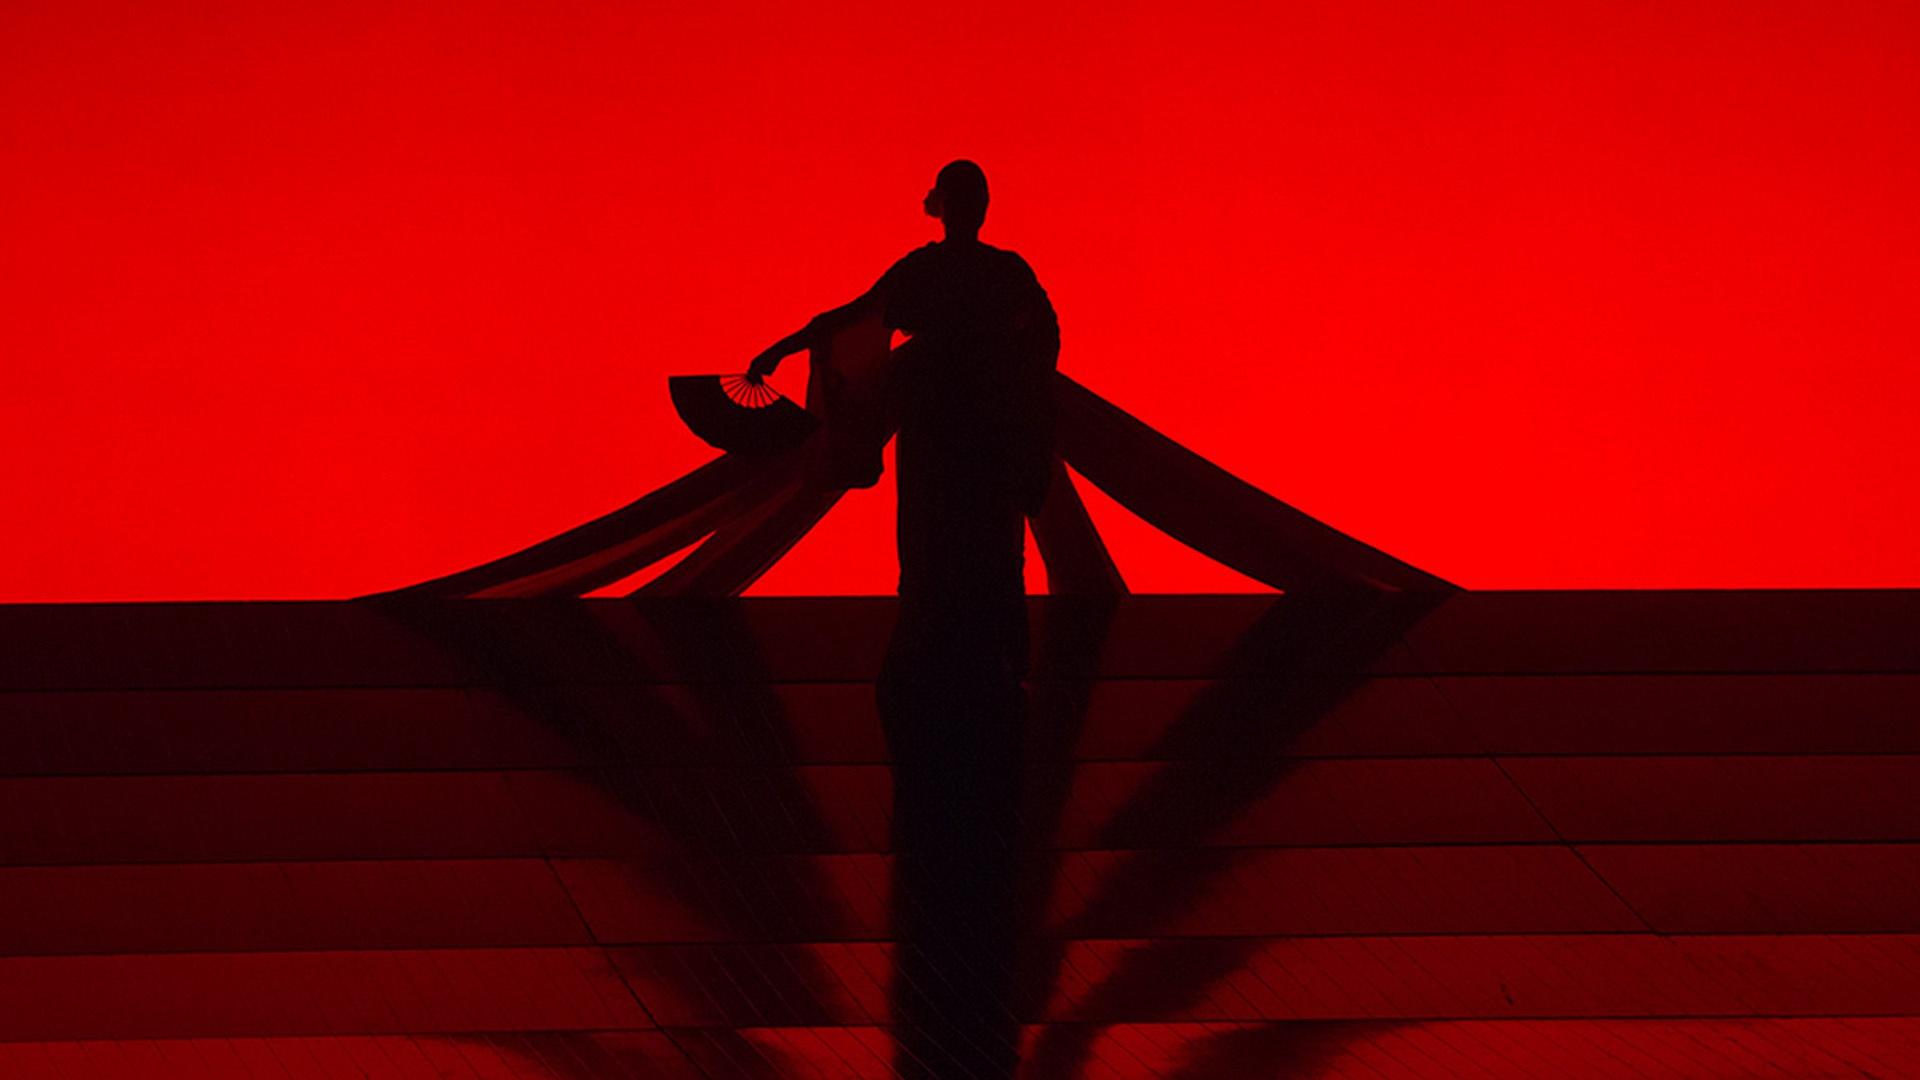 A scene from Madama Butterfly where a shadow of a woman in a kimono holding a Japanese hand fan can be seen with a bright red background